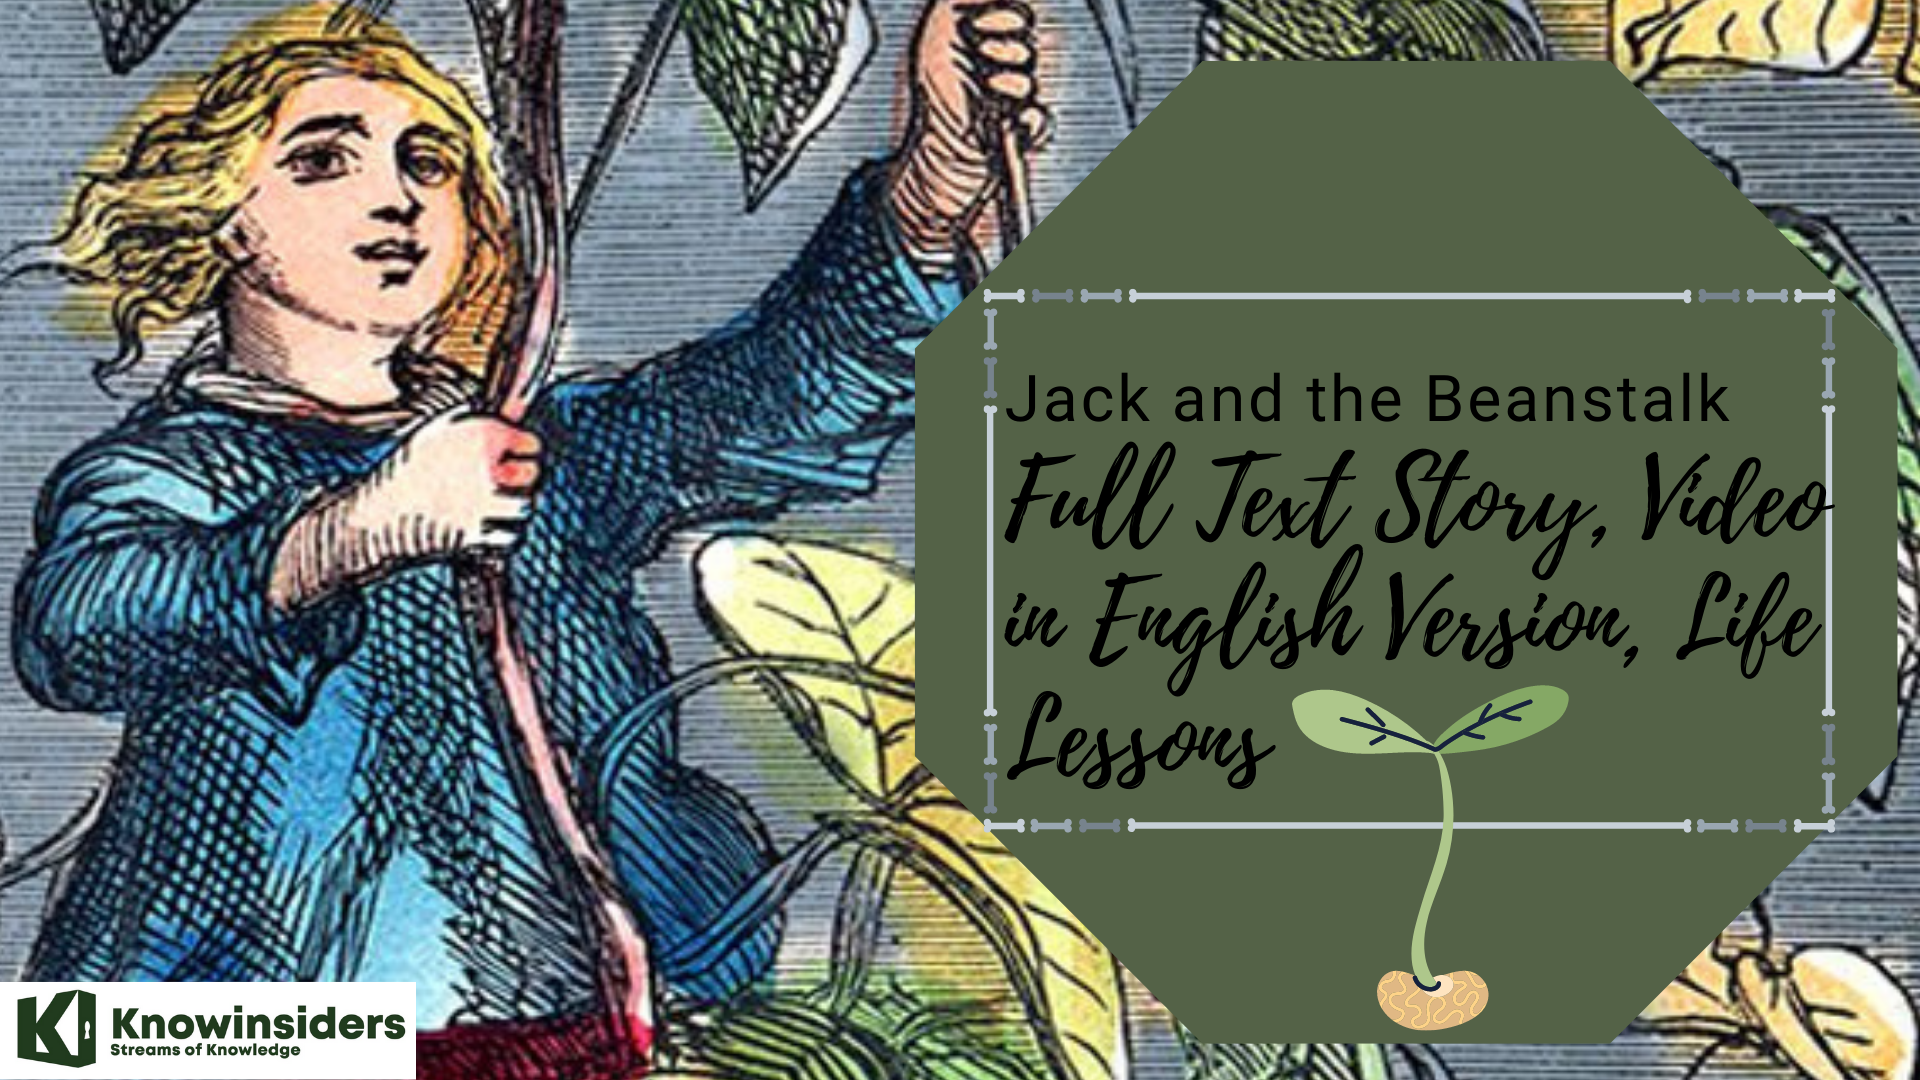  Jack and the Beanstalk: Full Text Story, Video in English Version, Life Lessons